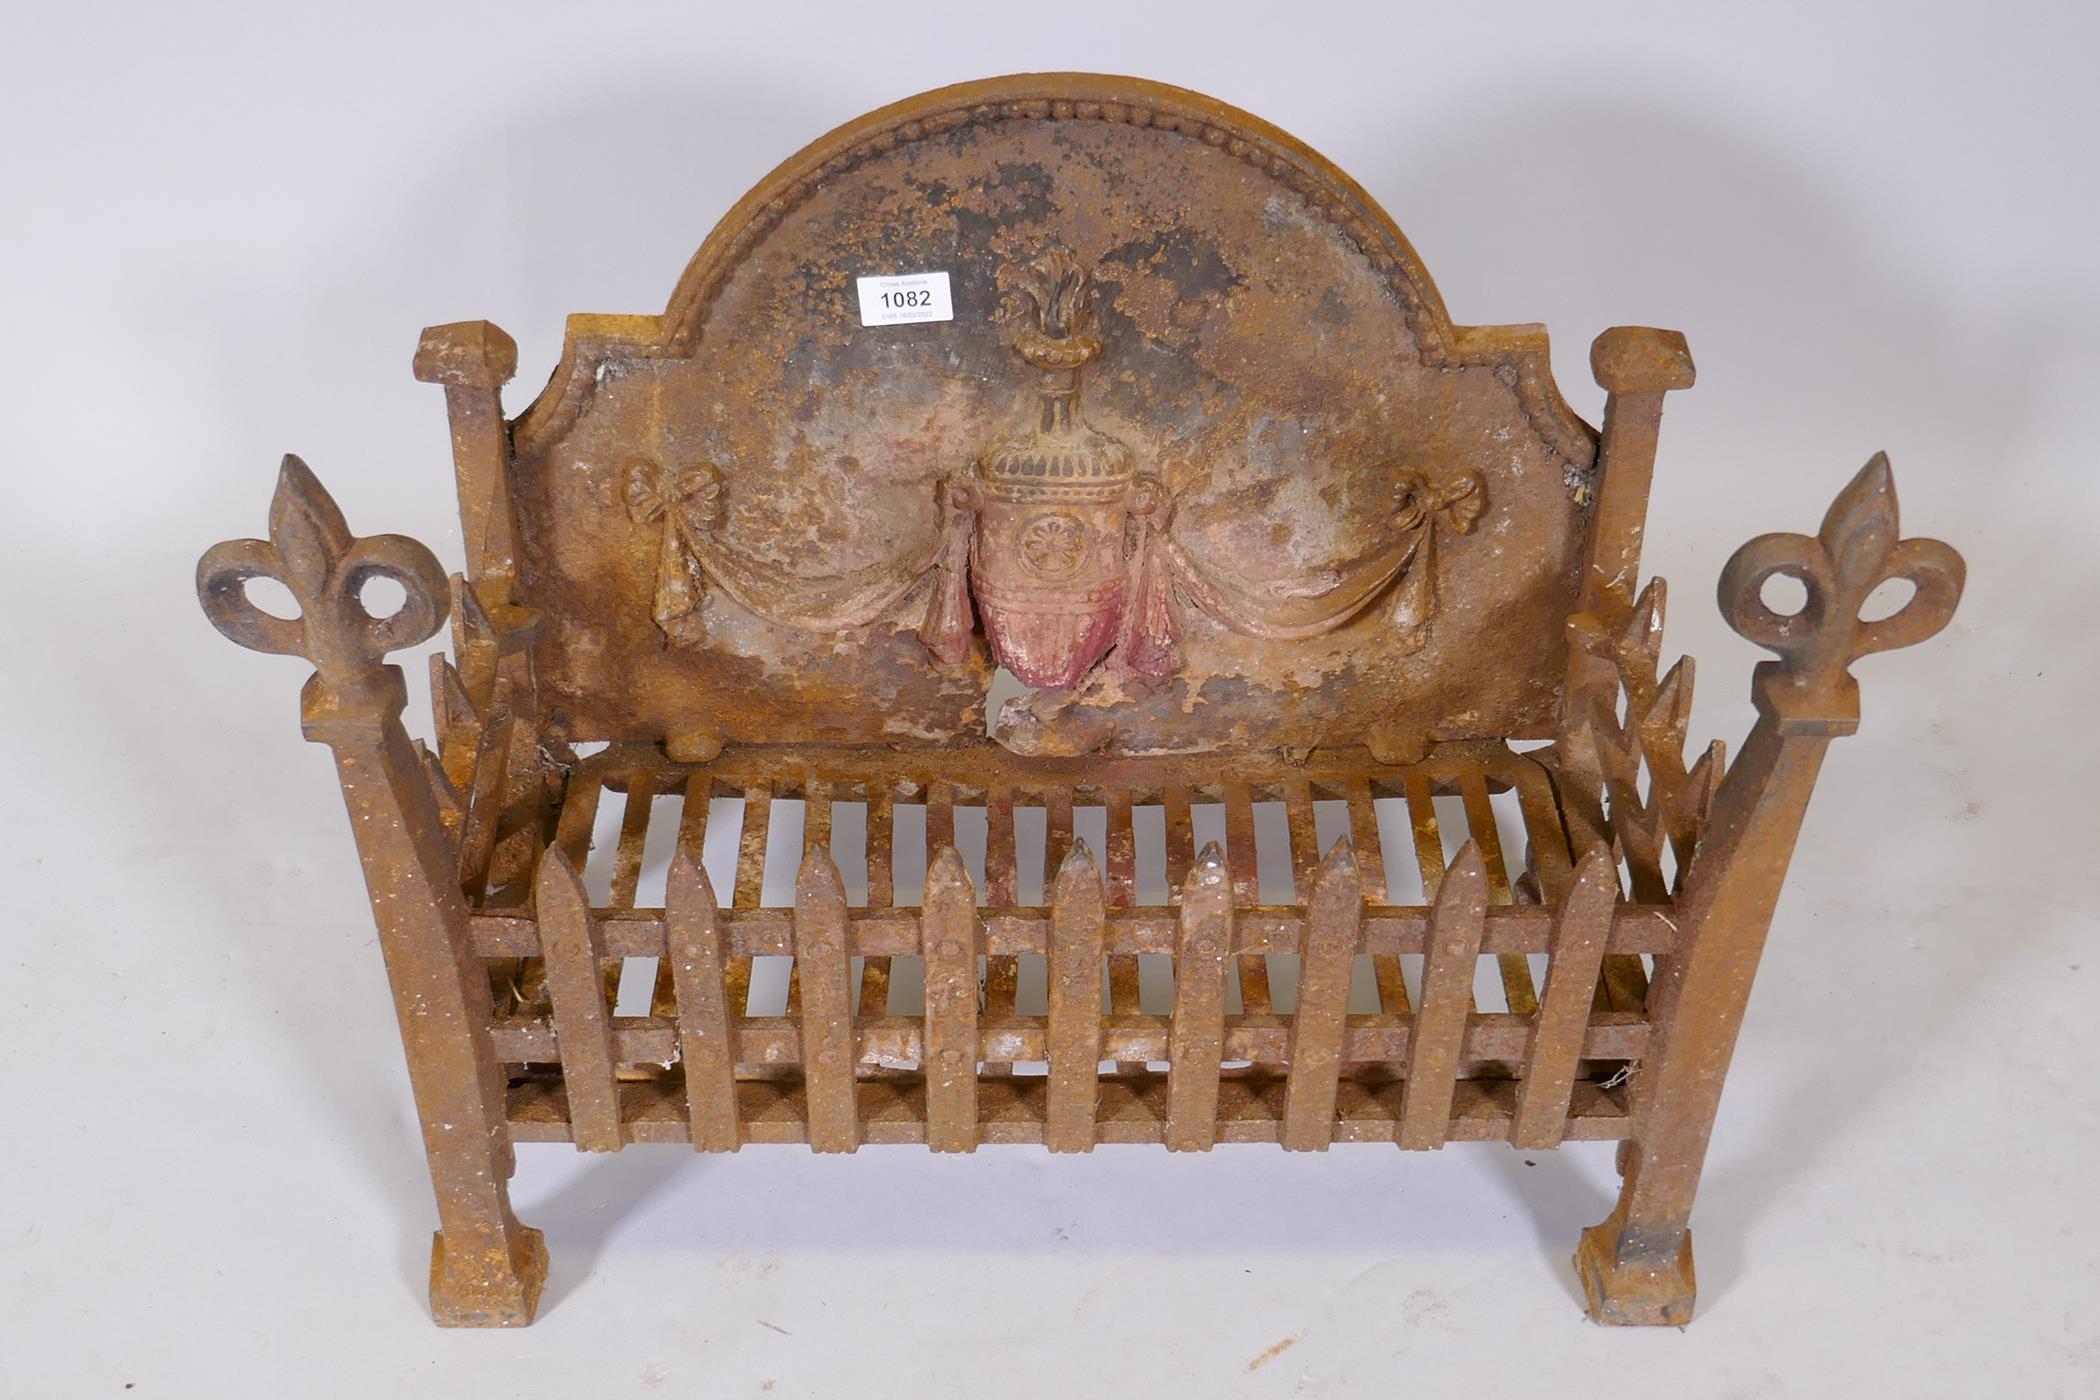 Antique cast iron fire basket with fleur de lys decoration, a poker and tongs, and cross cut saw, - Image 2 of 2